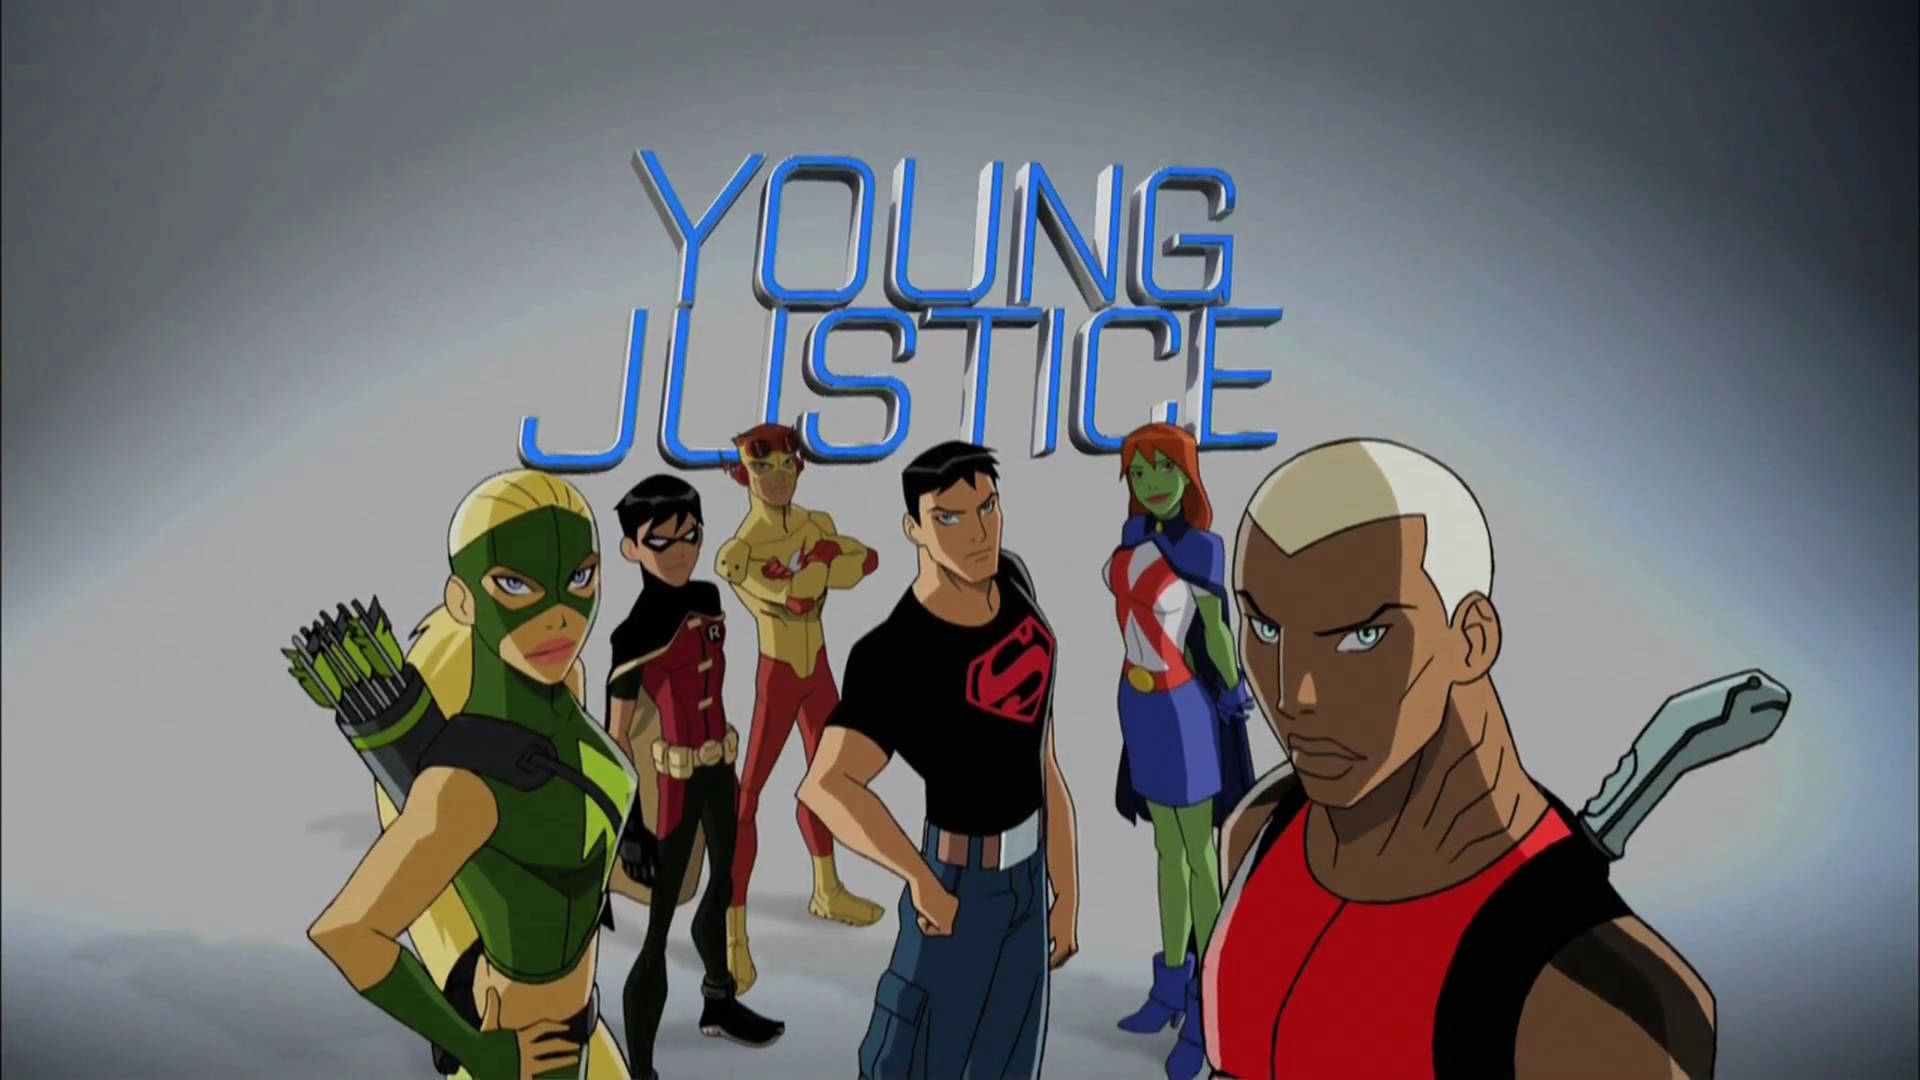 The Powerful Team Of Young Justice Strikes A Pose